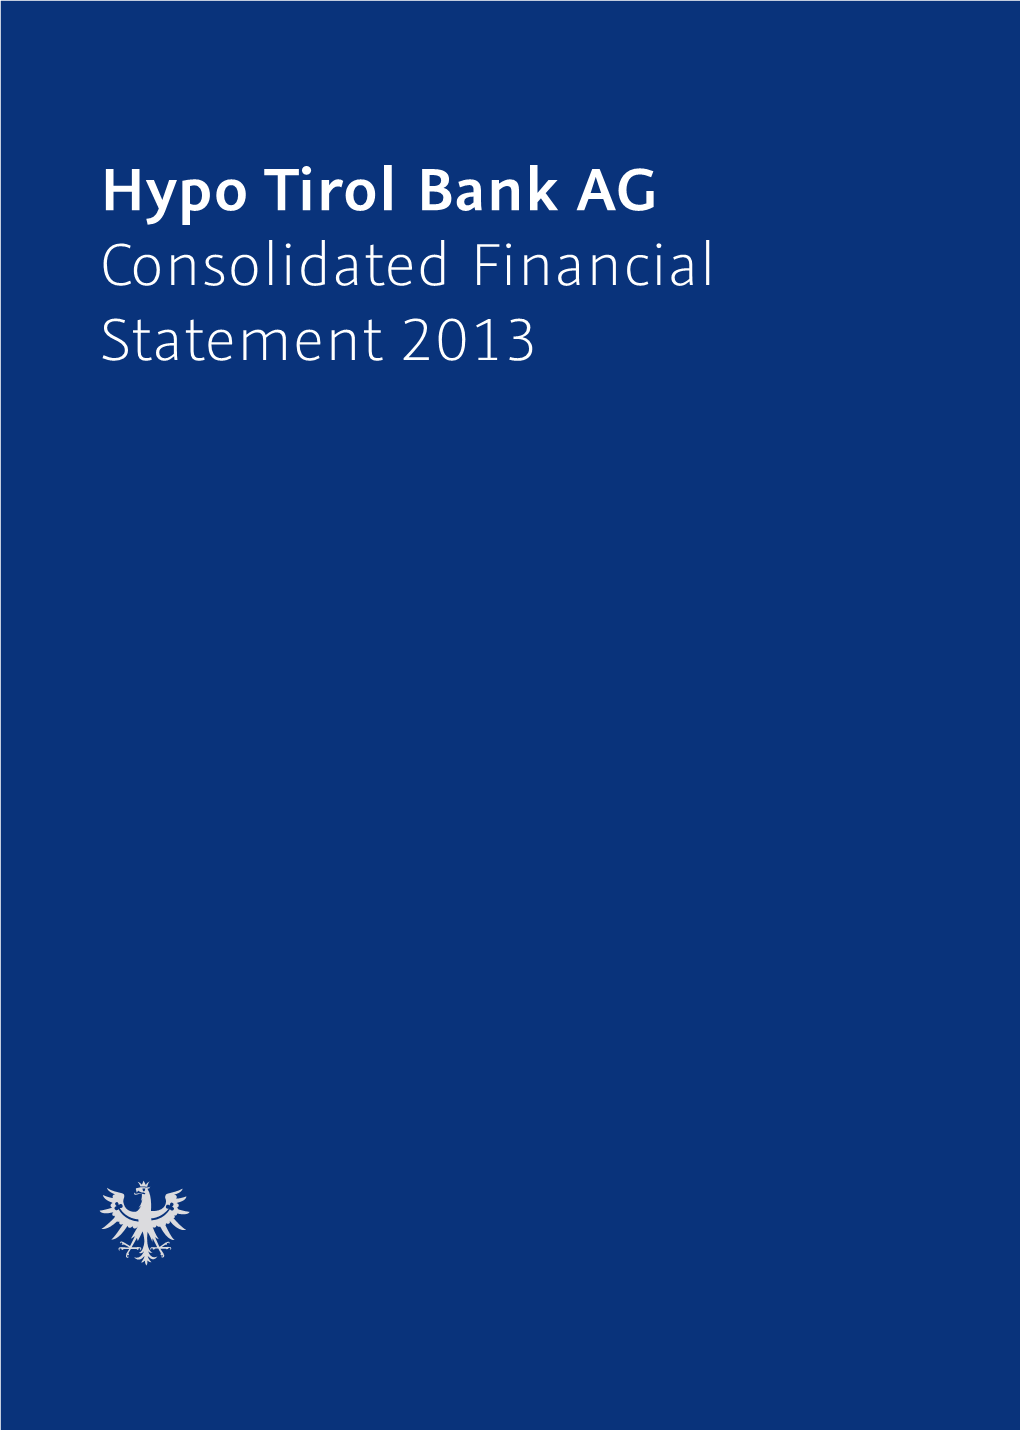 Hypo Tirol Bank AG Consolidated Financial Statement 2013